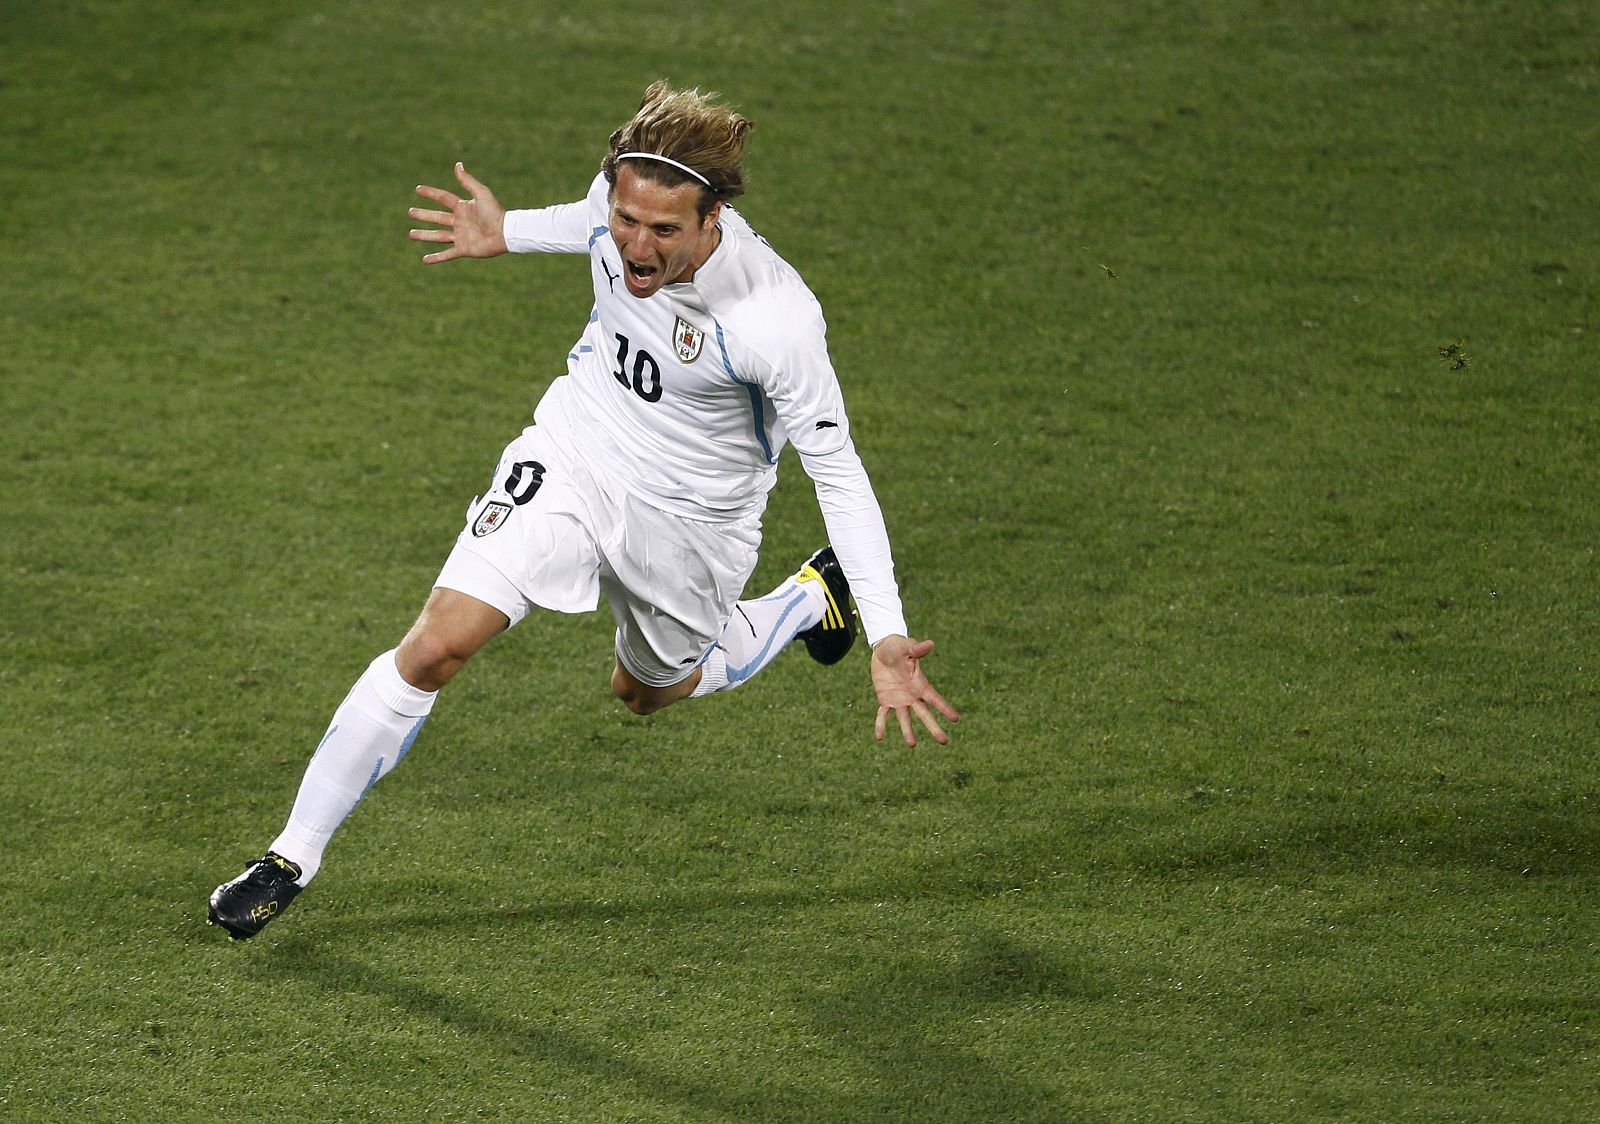 Uruguay's Forlan celebrates his goal during the 2010 World Cup Group A soccer match against South Africa at Loftus Versfeld stadium in Pretoria